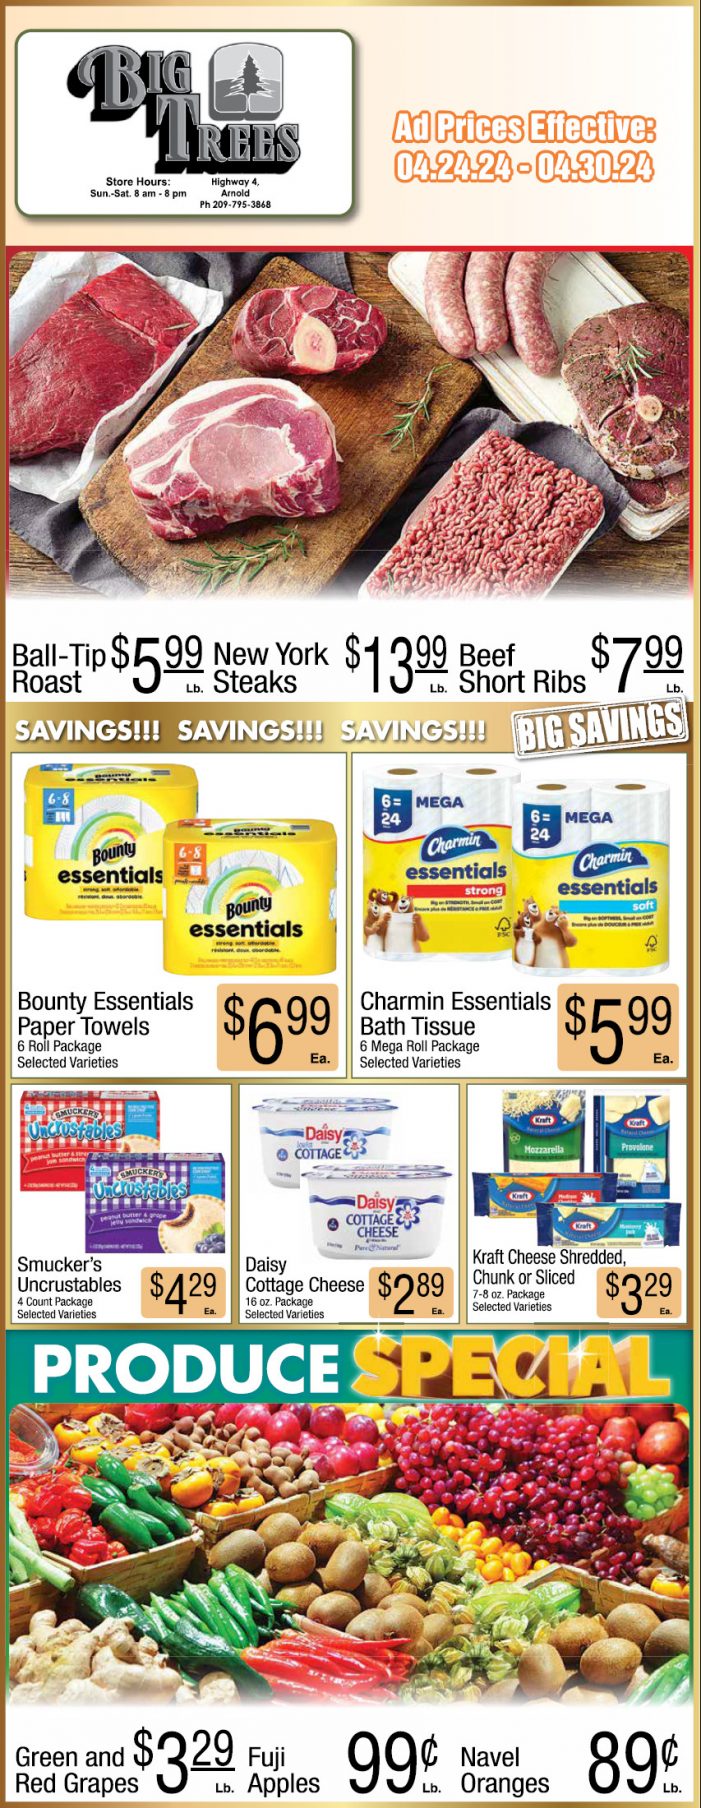 Big Trees Market Weekly Ad, Grocery, Produce, Meat & Deli Specials Through April 30! Shop Local & Save!